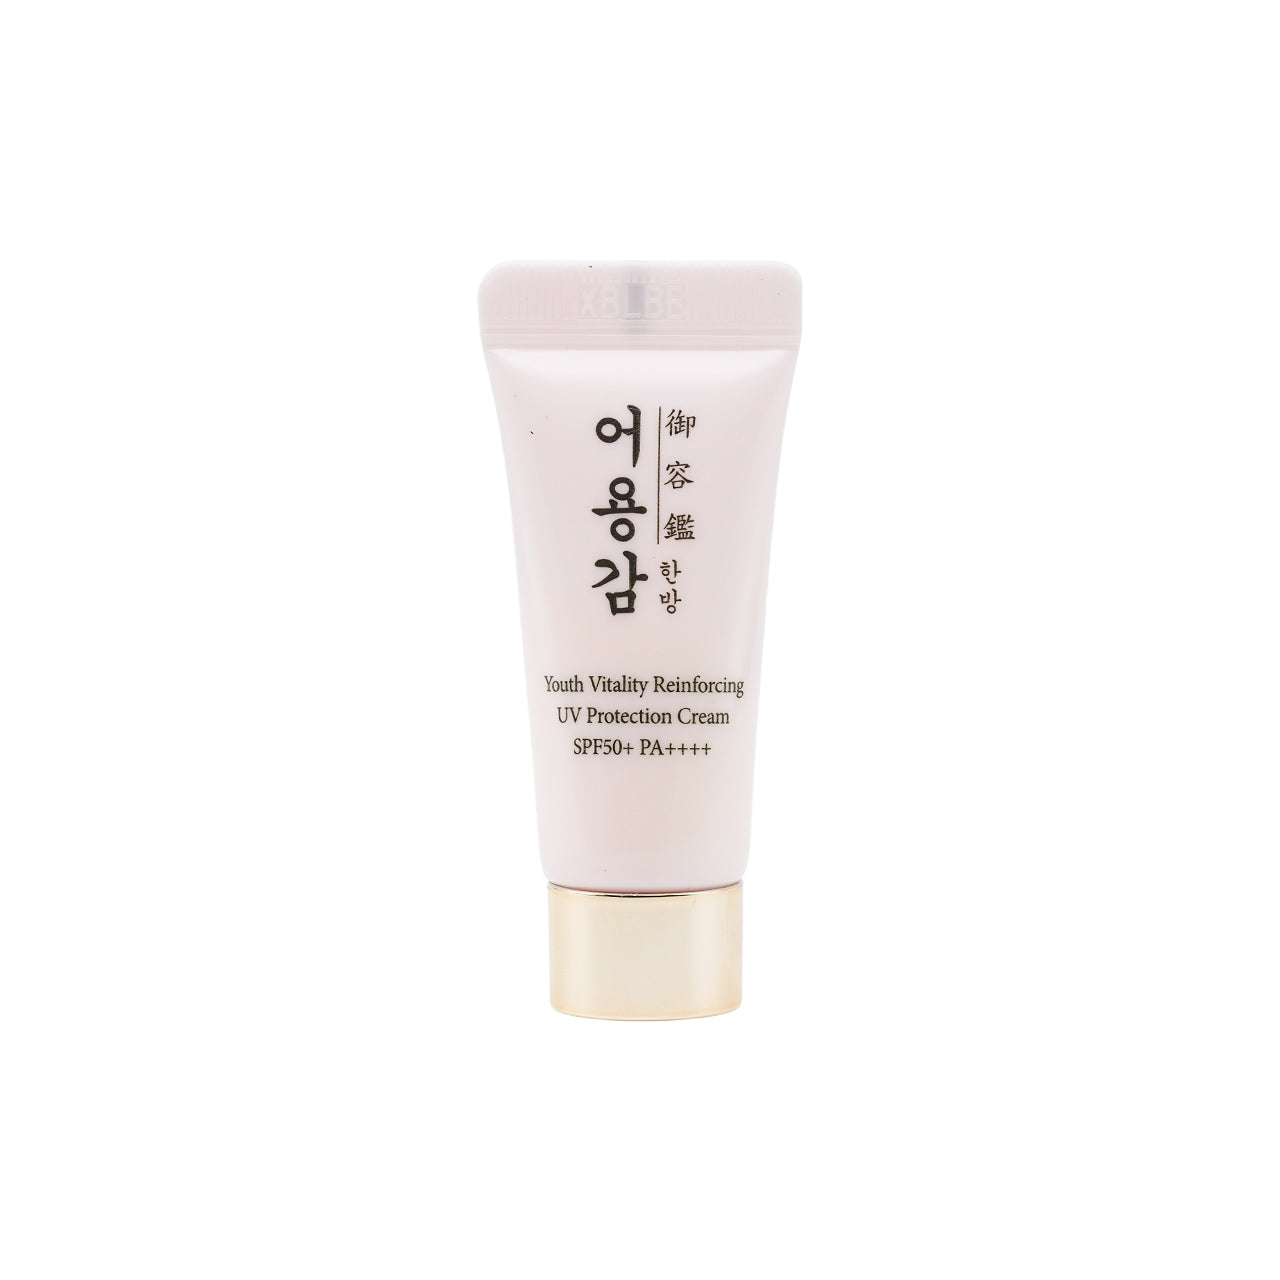 Eoyunggam Youth Vitality SPF50+ PA++++ Reinforcing UV Protection Cream 5ml